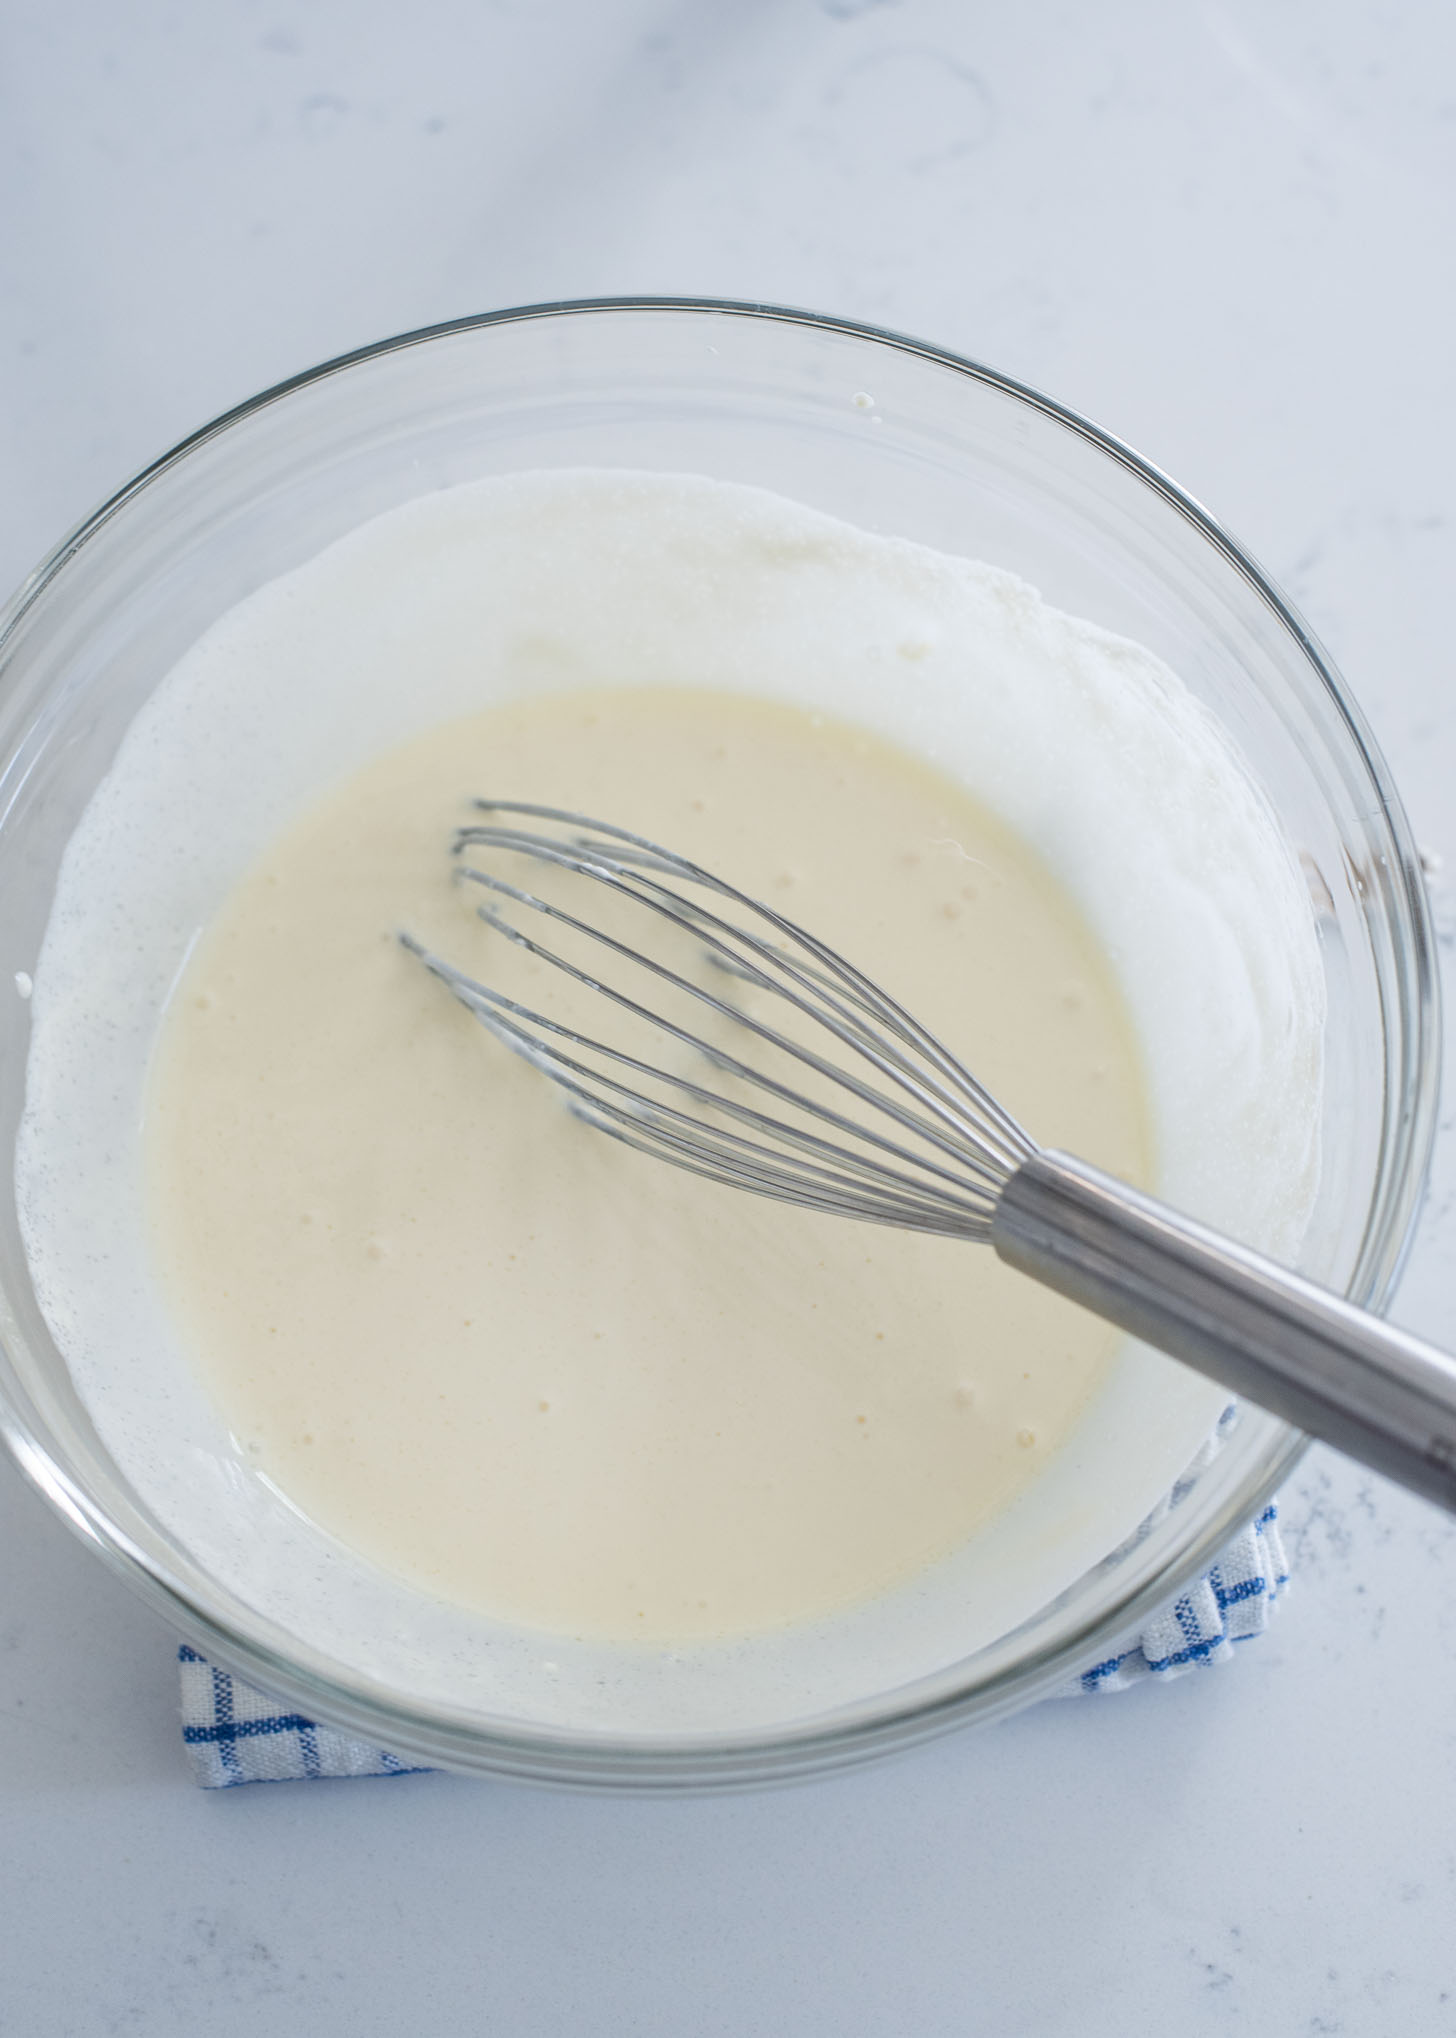 Creamy filling is mixed with a whisk in a mixing bowl.